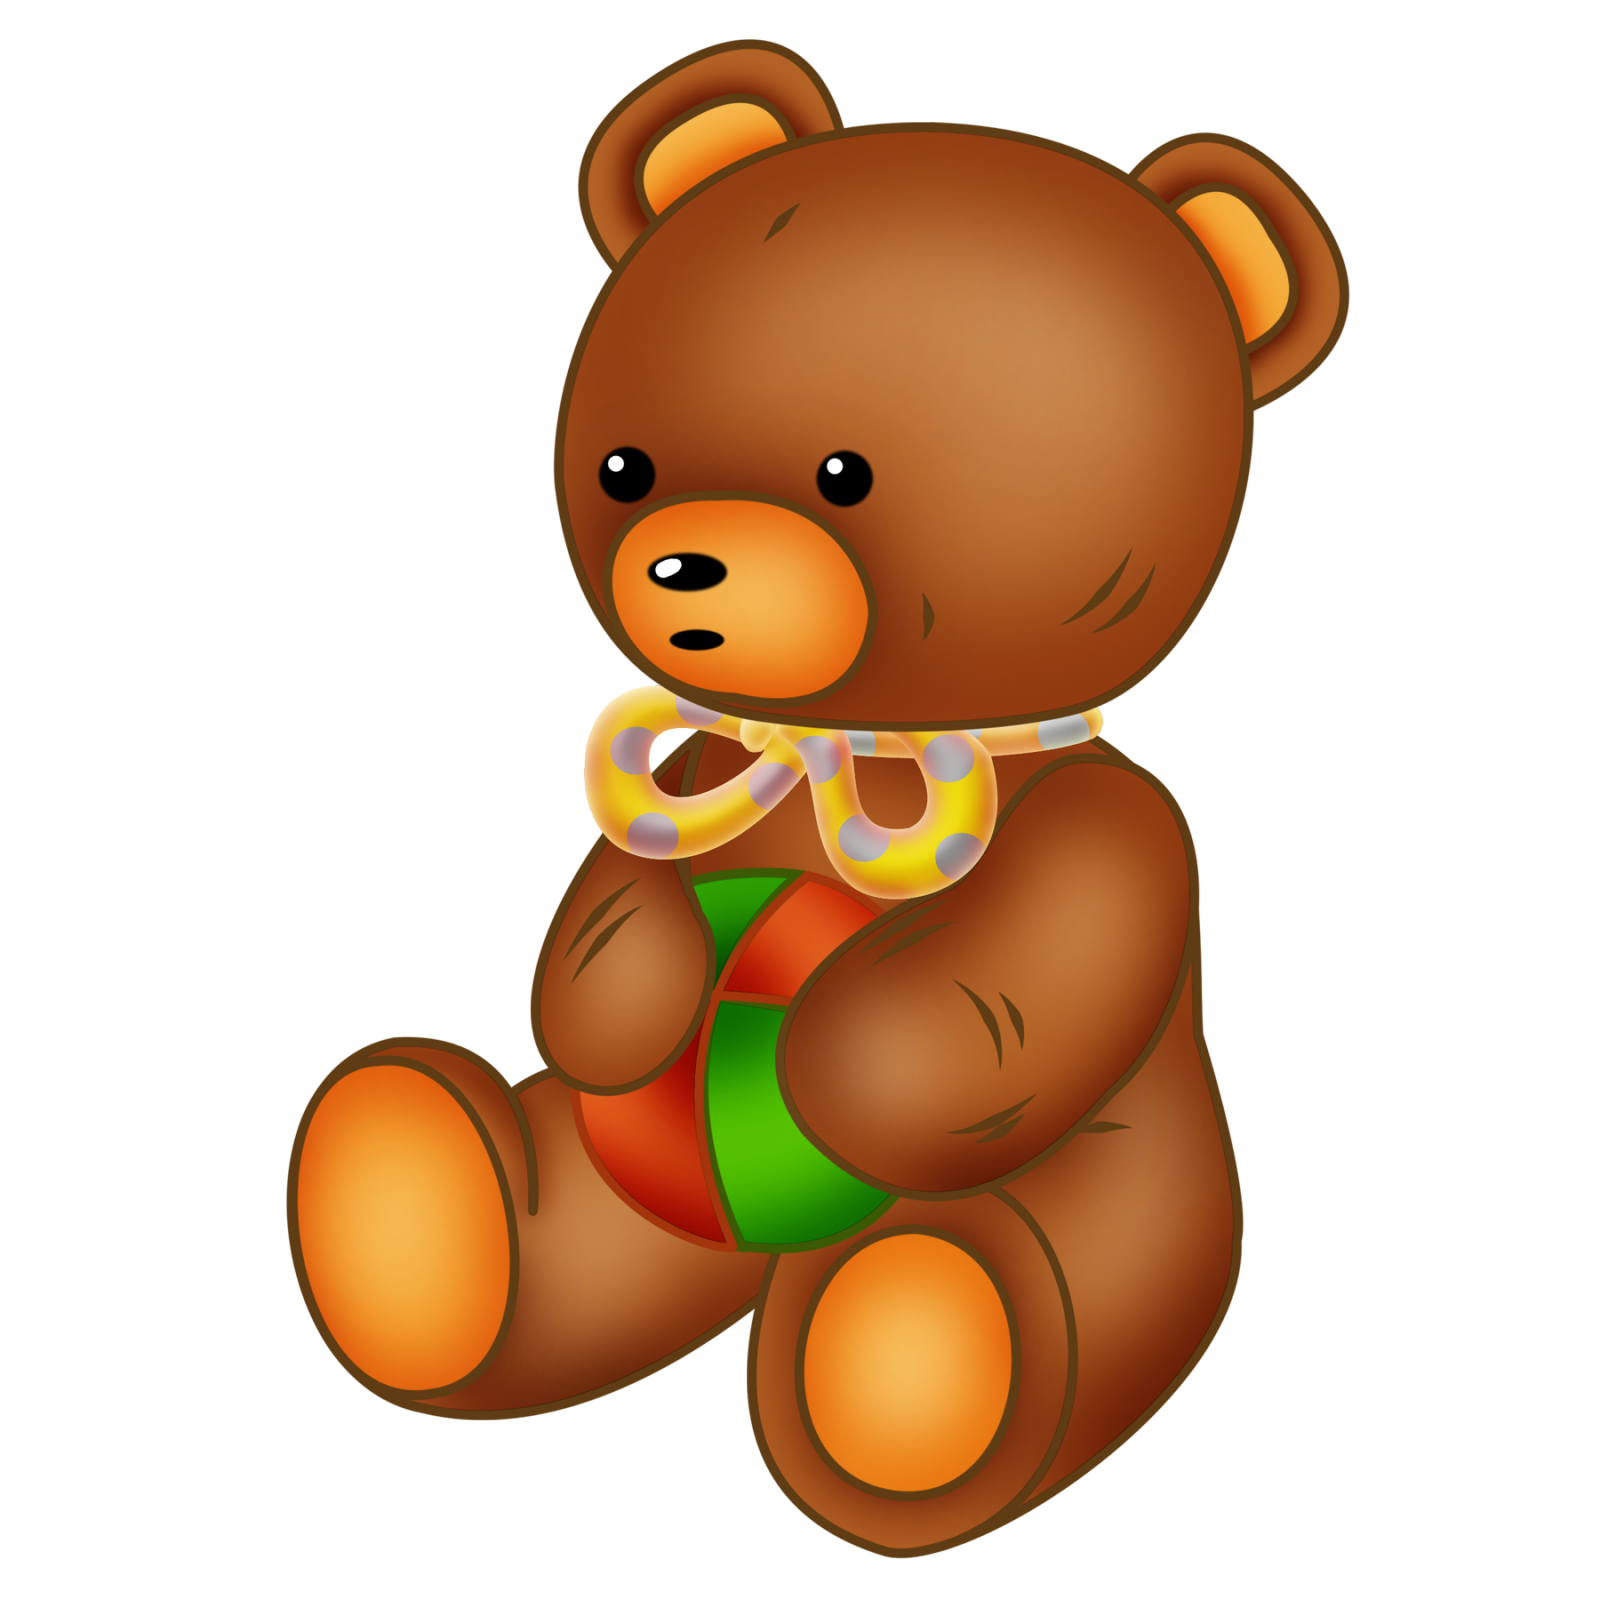 ourson_bear_1.png.